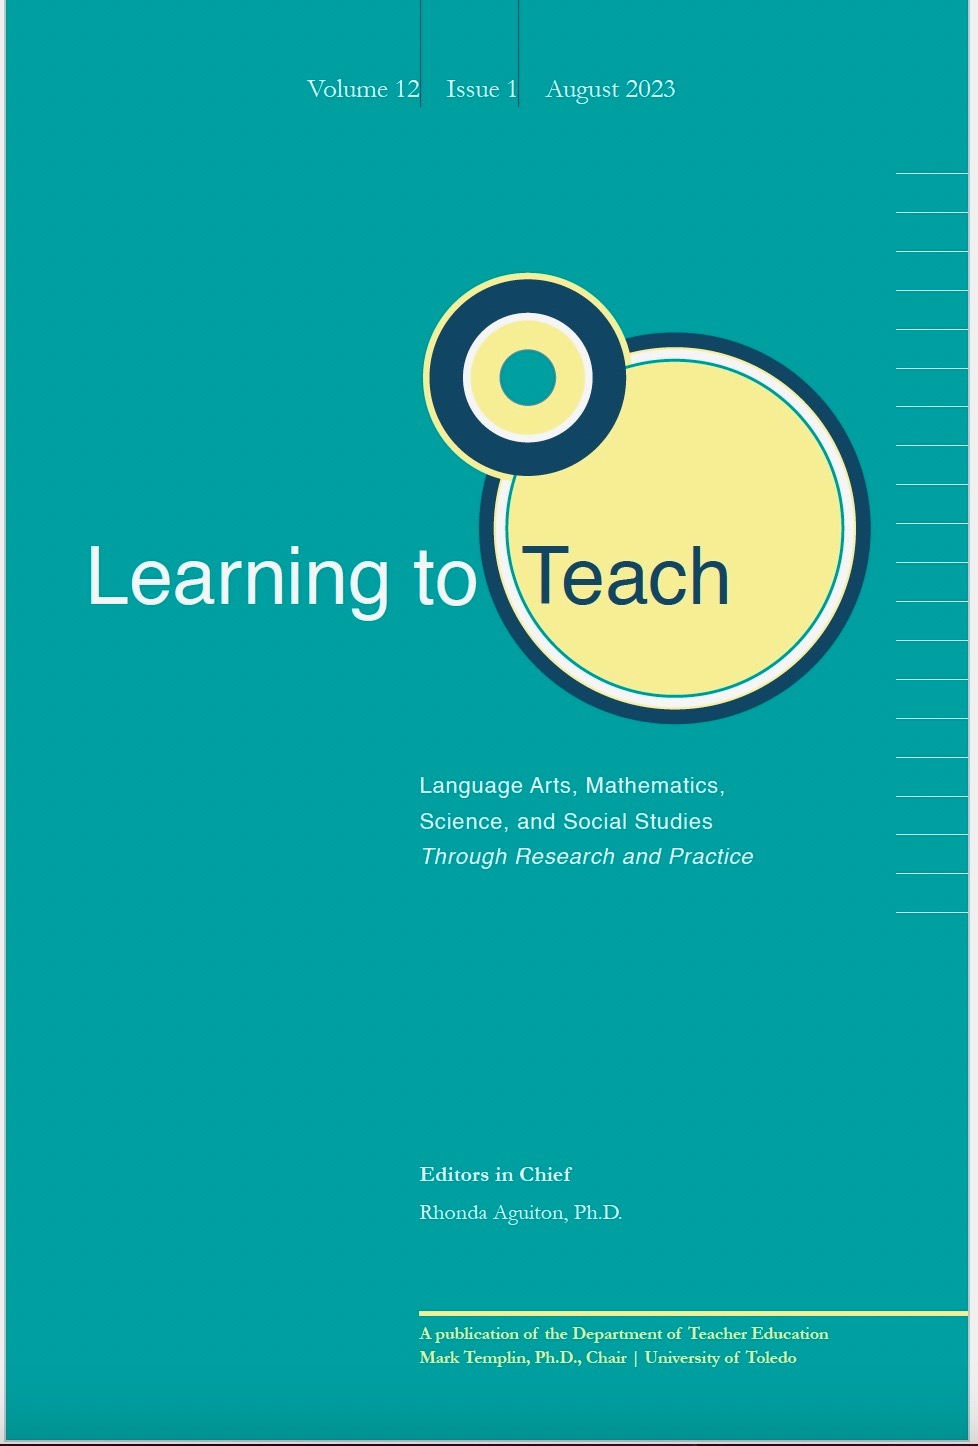 Cover of Learning to Teach Language Arts, Mathematics, Science, and Social Studies Through Research and Practice, Vol. 12 No. 1 (2023)